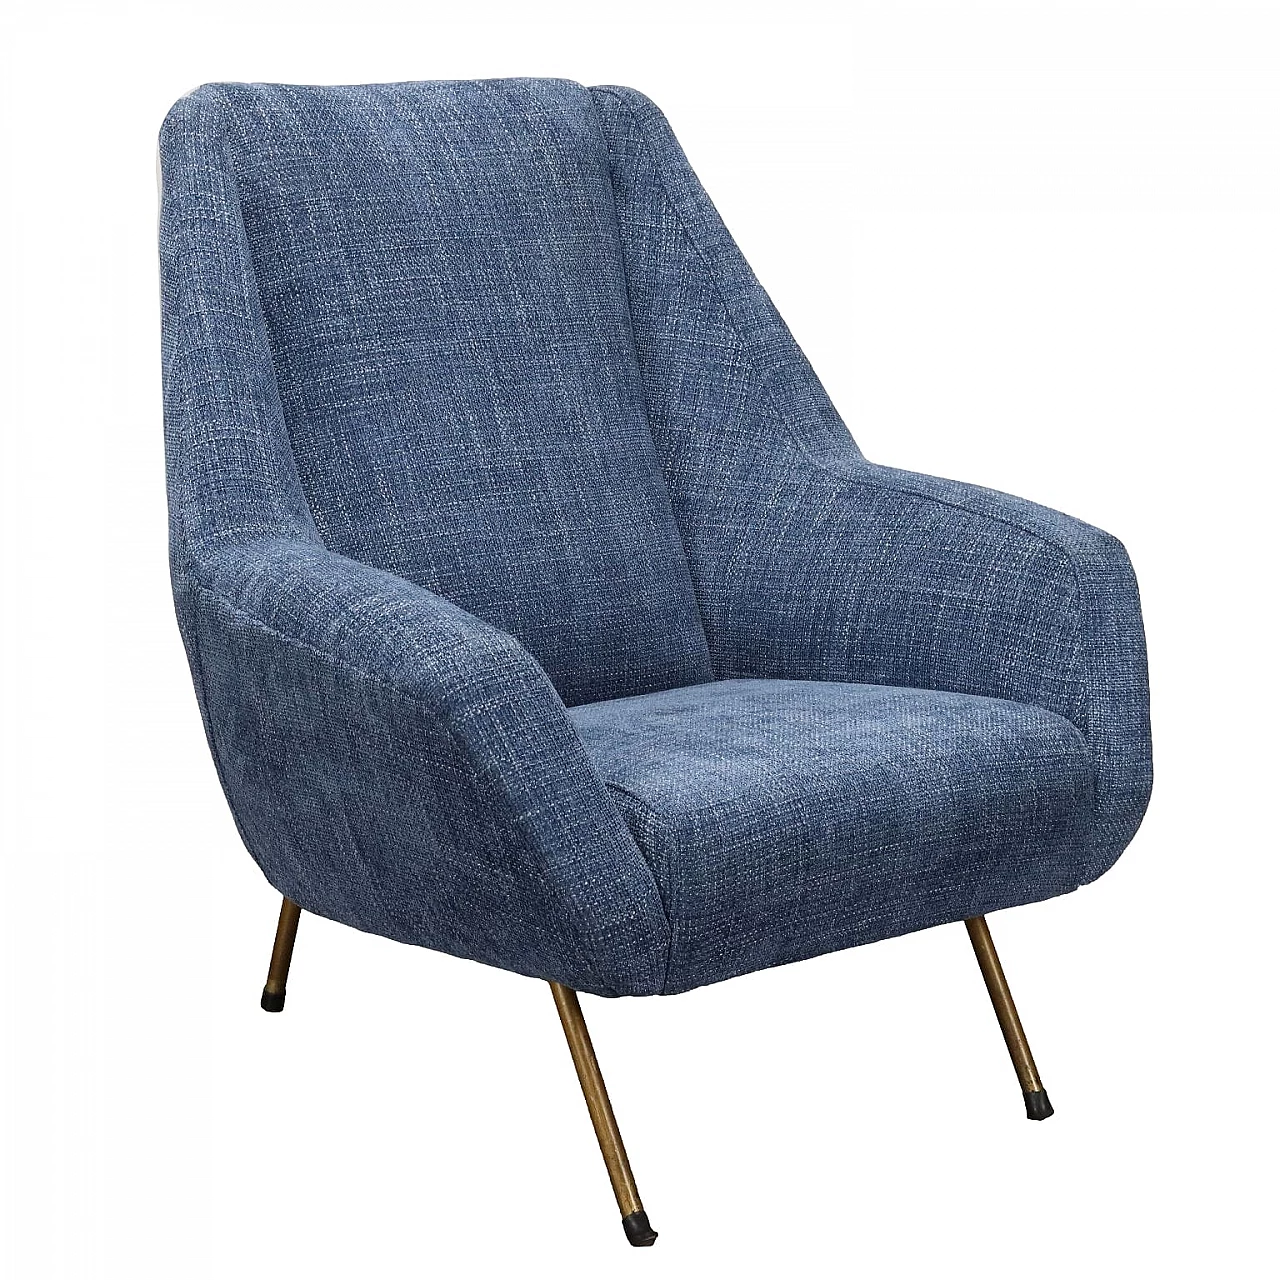 Armchair in blue fabric and brass-plated metal legs, 1960s 1